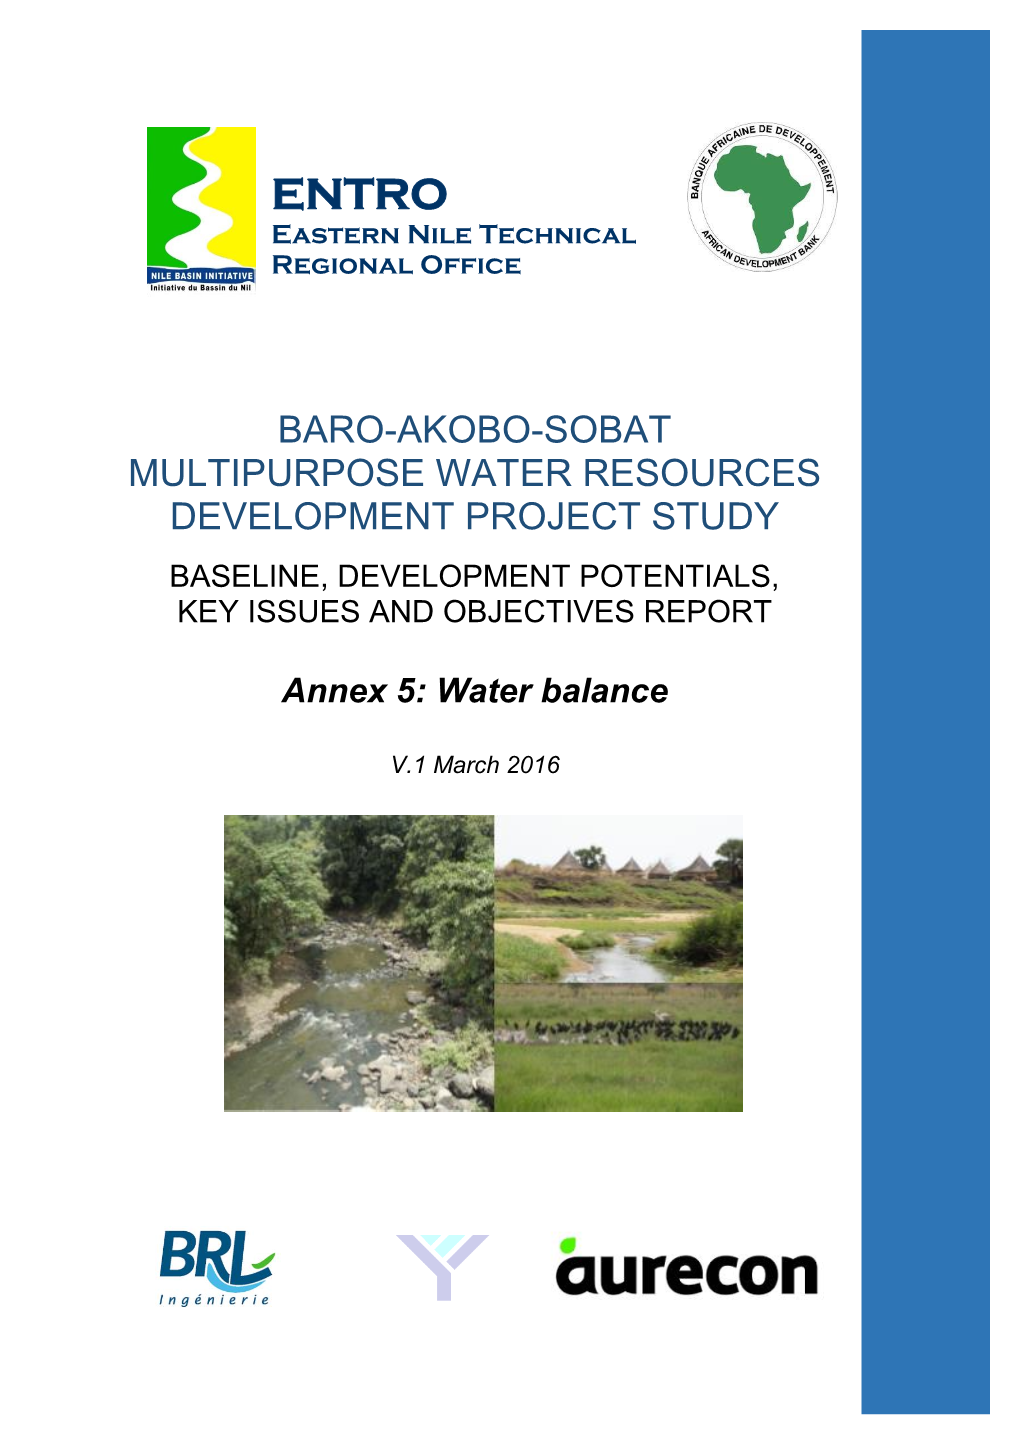 Baro-Akobo-Sobat Multipurpose Water Resources Development Project Study Baseline, Development Potentials, Key Issues and Objectives Report